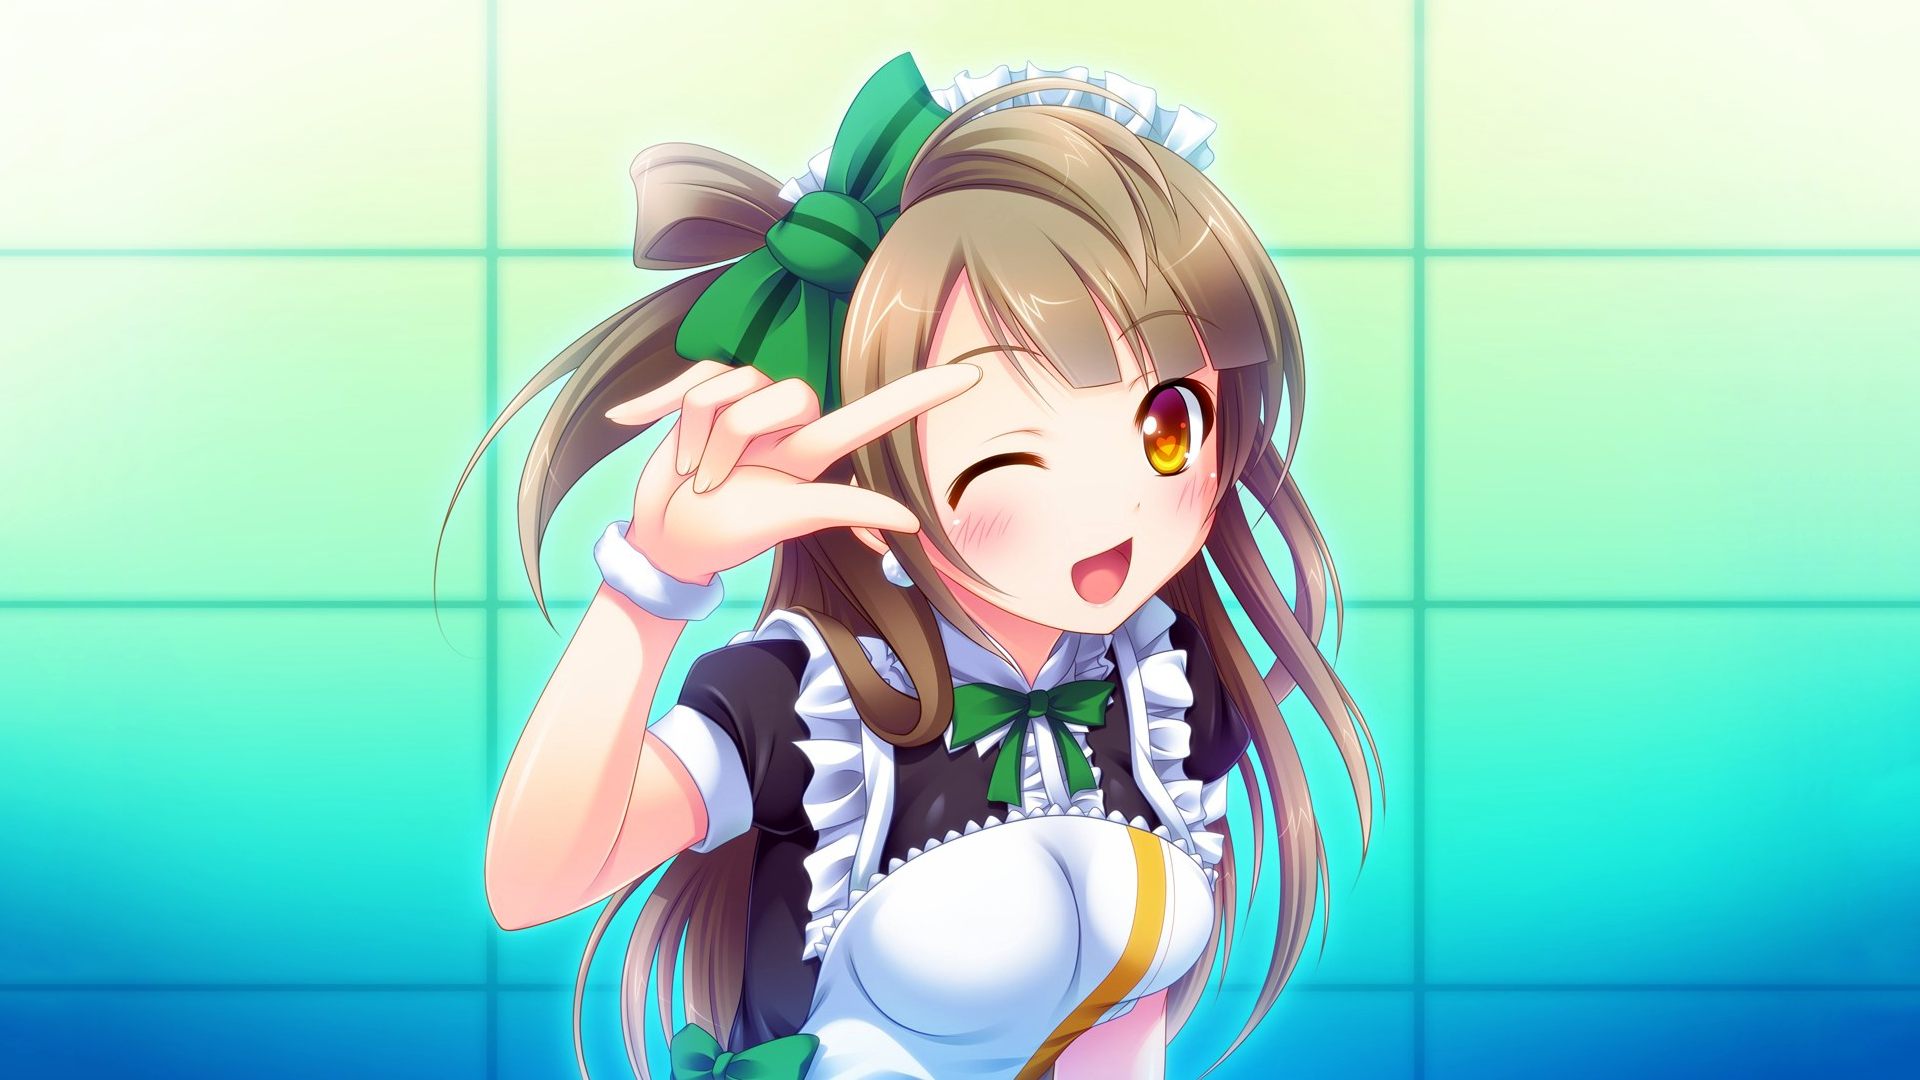 Anime 1920x1080 anime anime girls Love Live! maid outfit Minami Kotori wink hand gesture one eye closed open mouth yellow eyes brunette cyan background